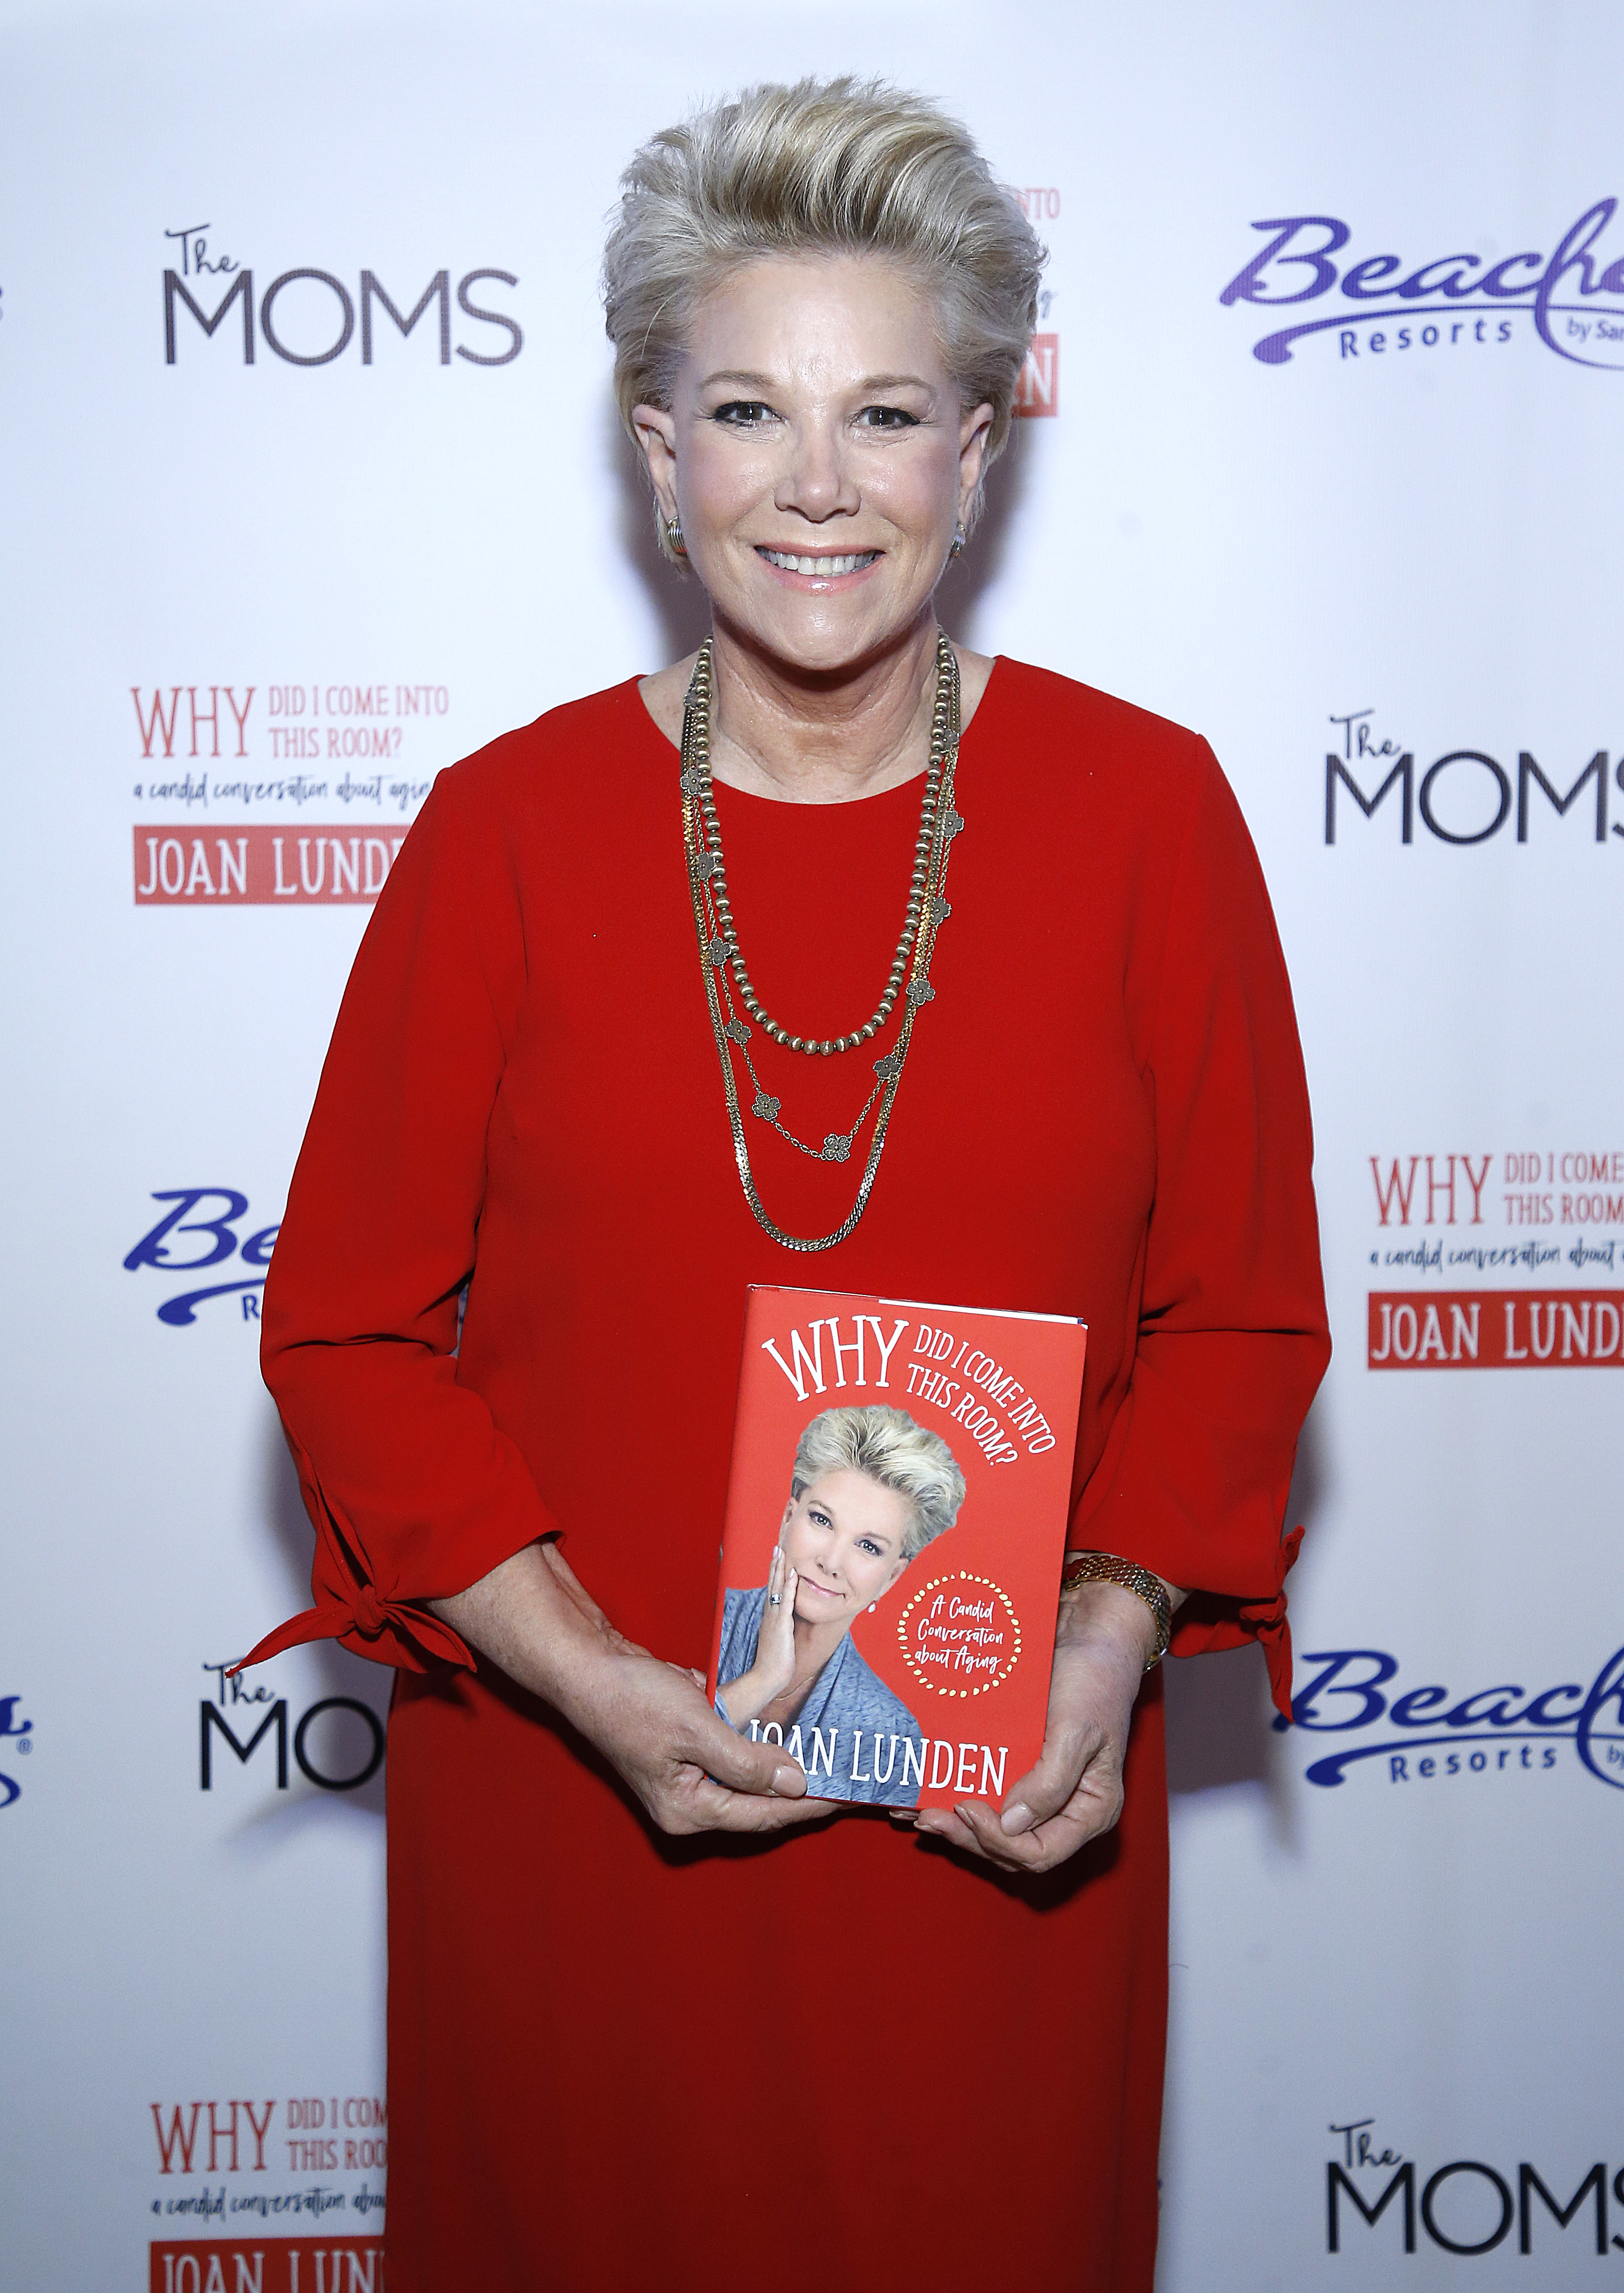 Joan Lunden celebrates the launch of her new book with Mamarazzi event in New York City on March 10, 2020. | Source: Getty Images